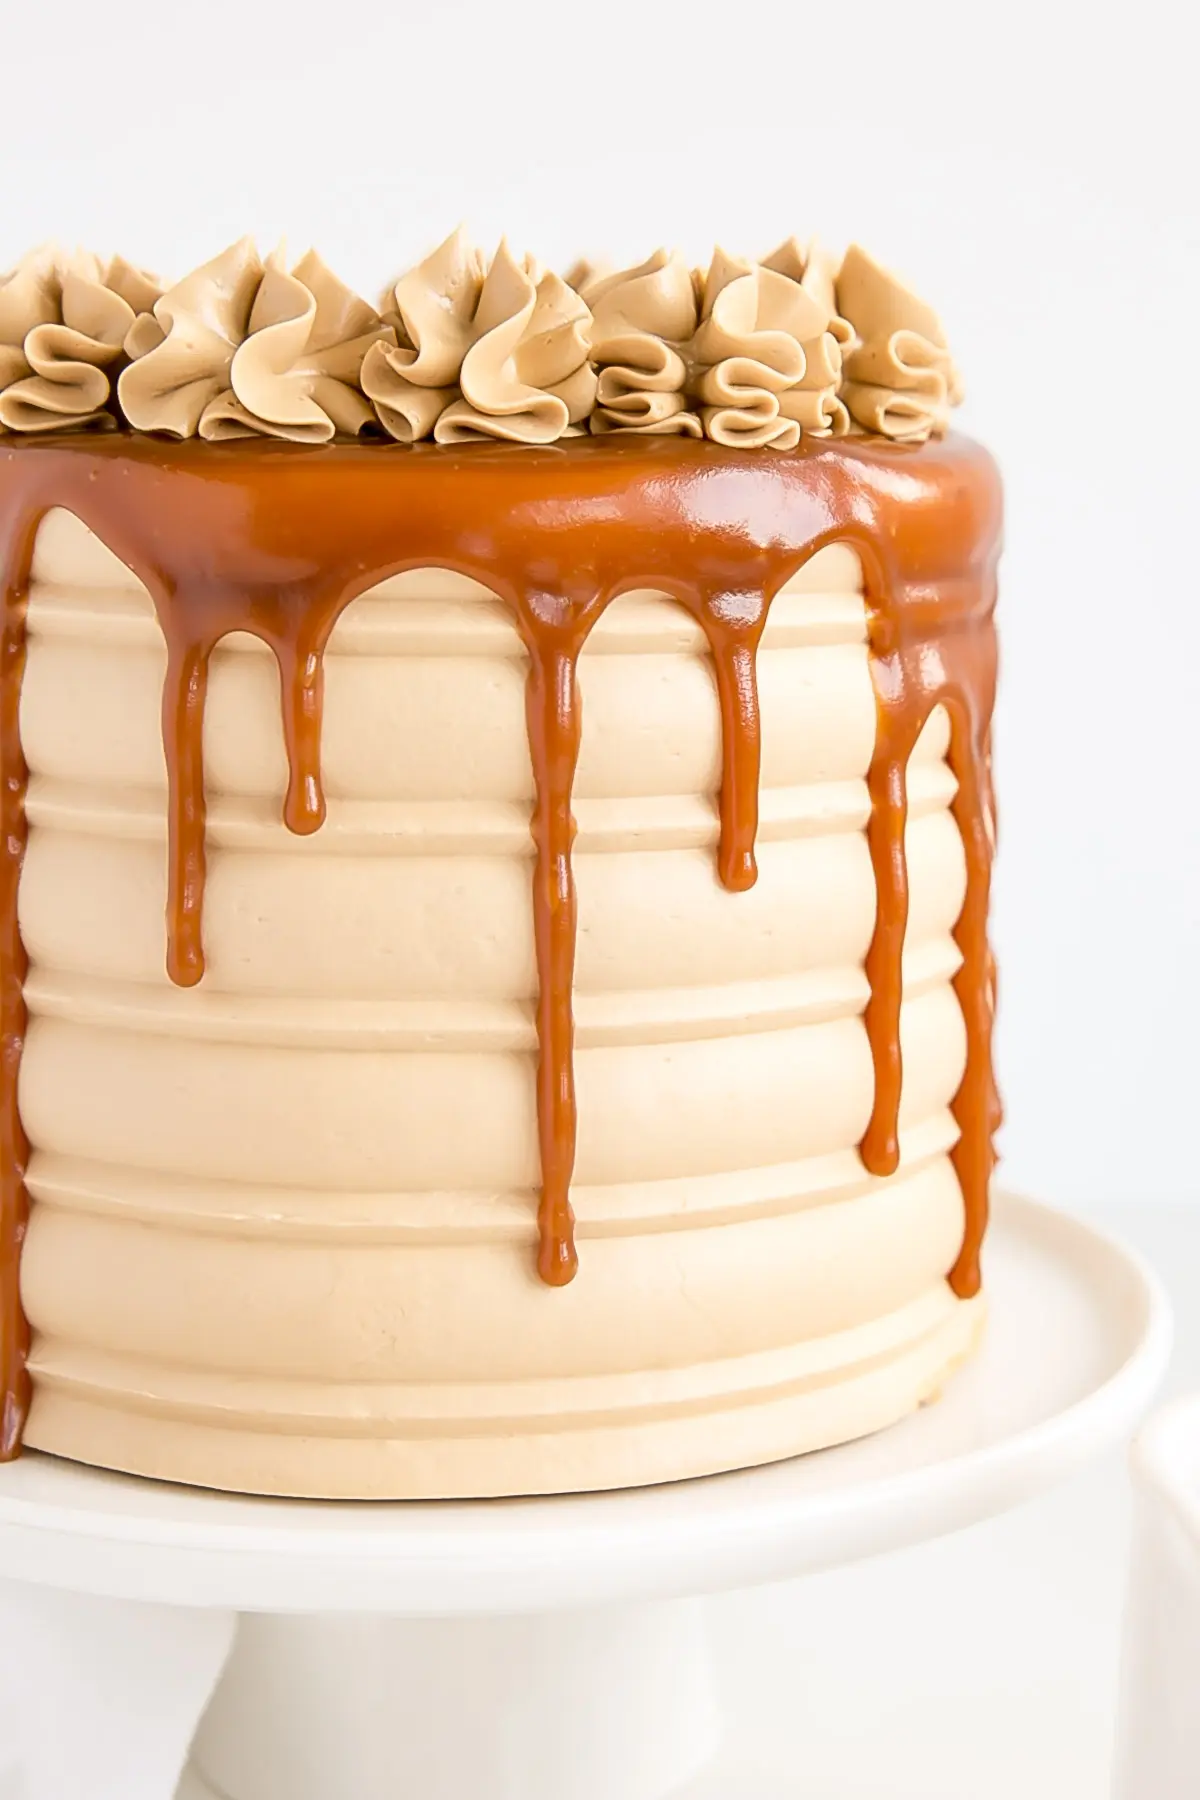 Close up of a caramel cake showing textured sides and a caramel drip.